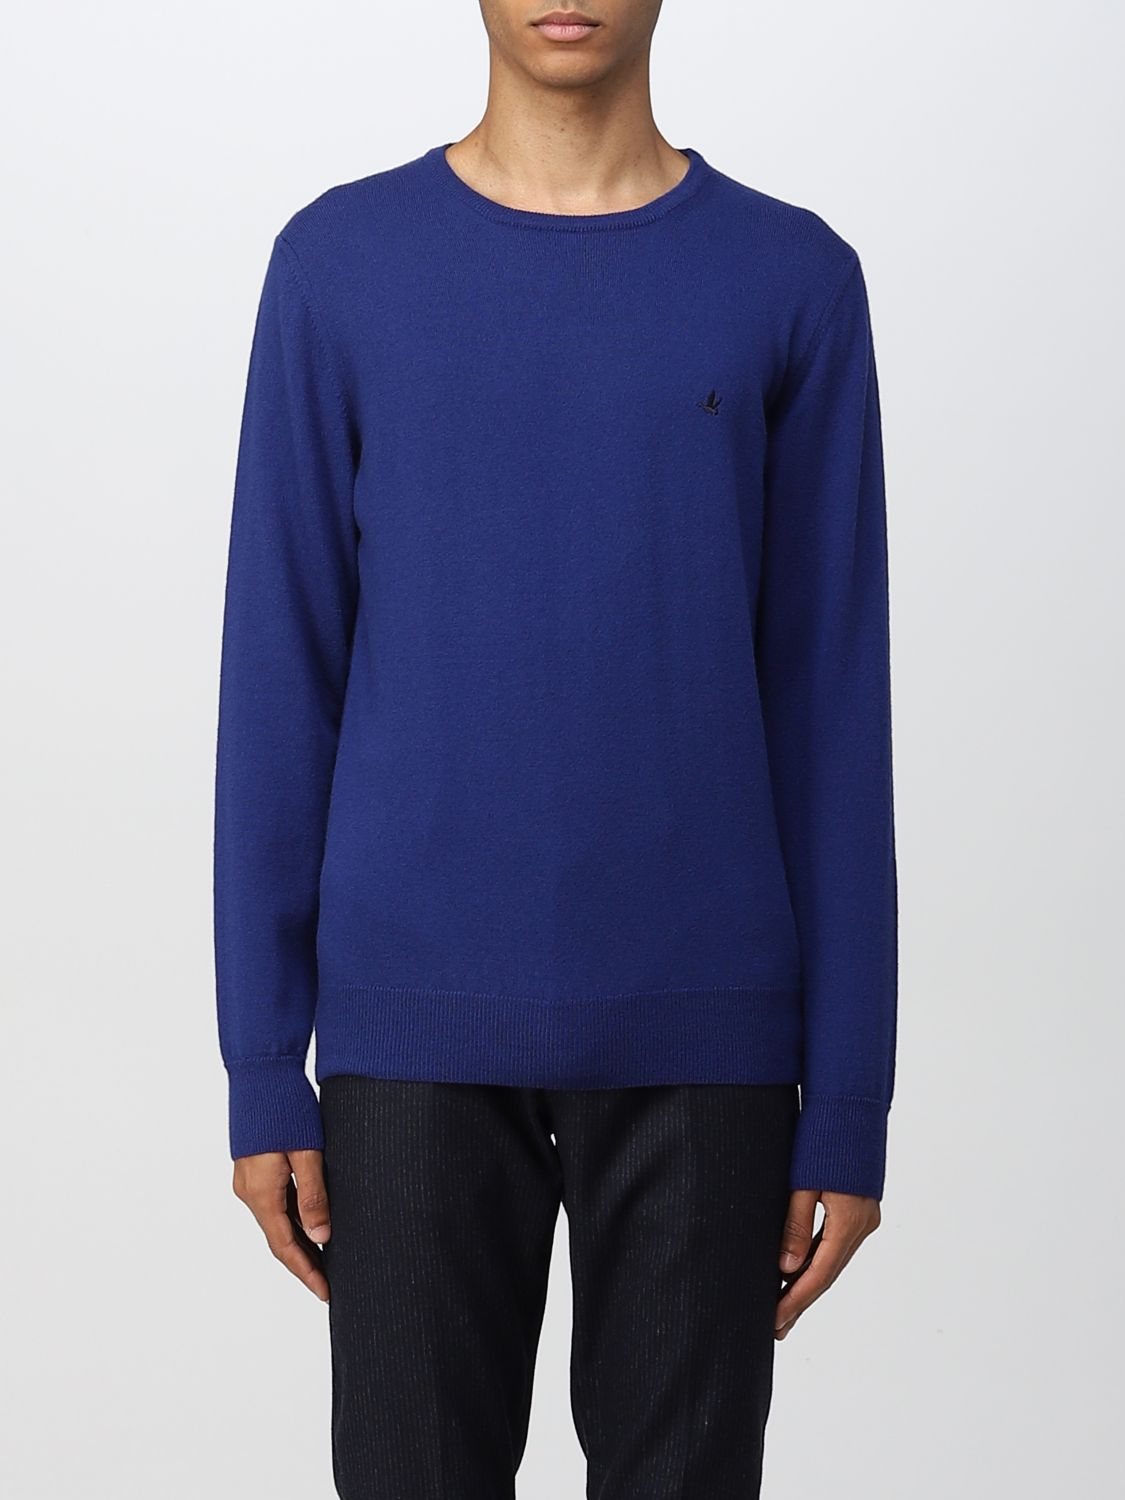 BROOKSFIELD: sweater for man - Gnawed Blue | Brooksfield sweater ...